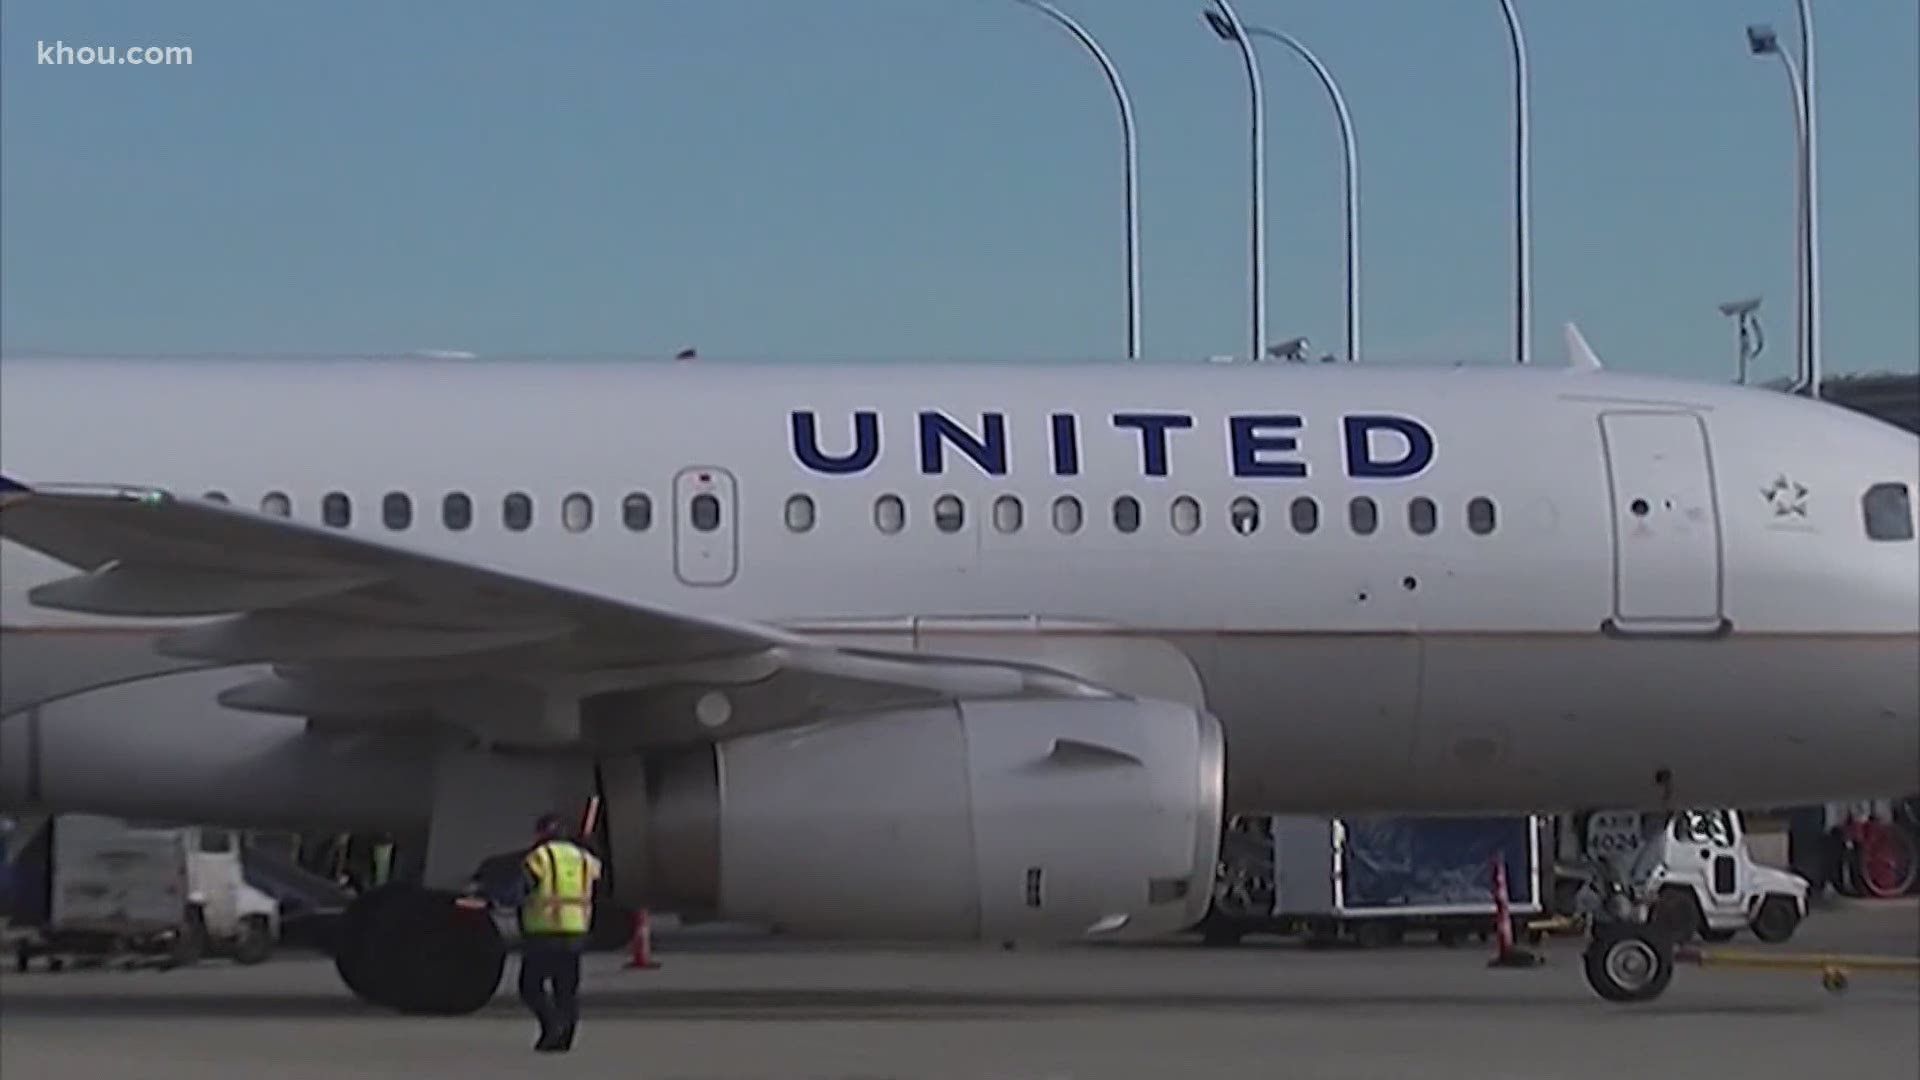 Here's how United Airlines layoffs impact Houston